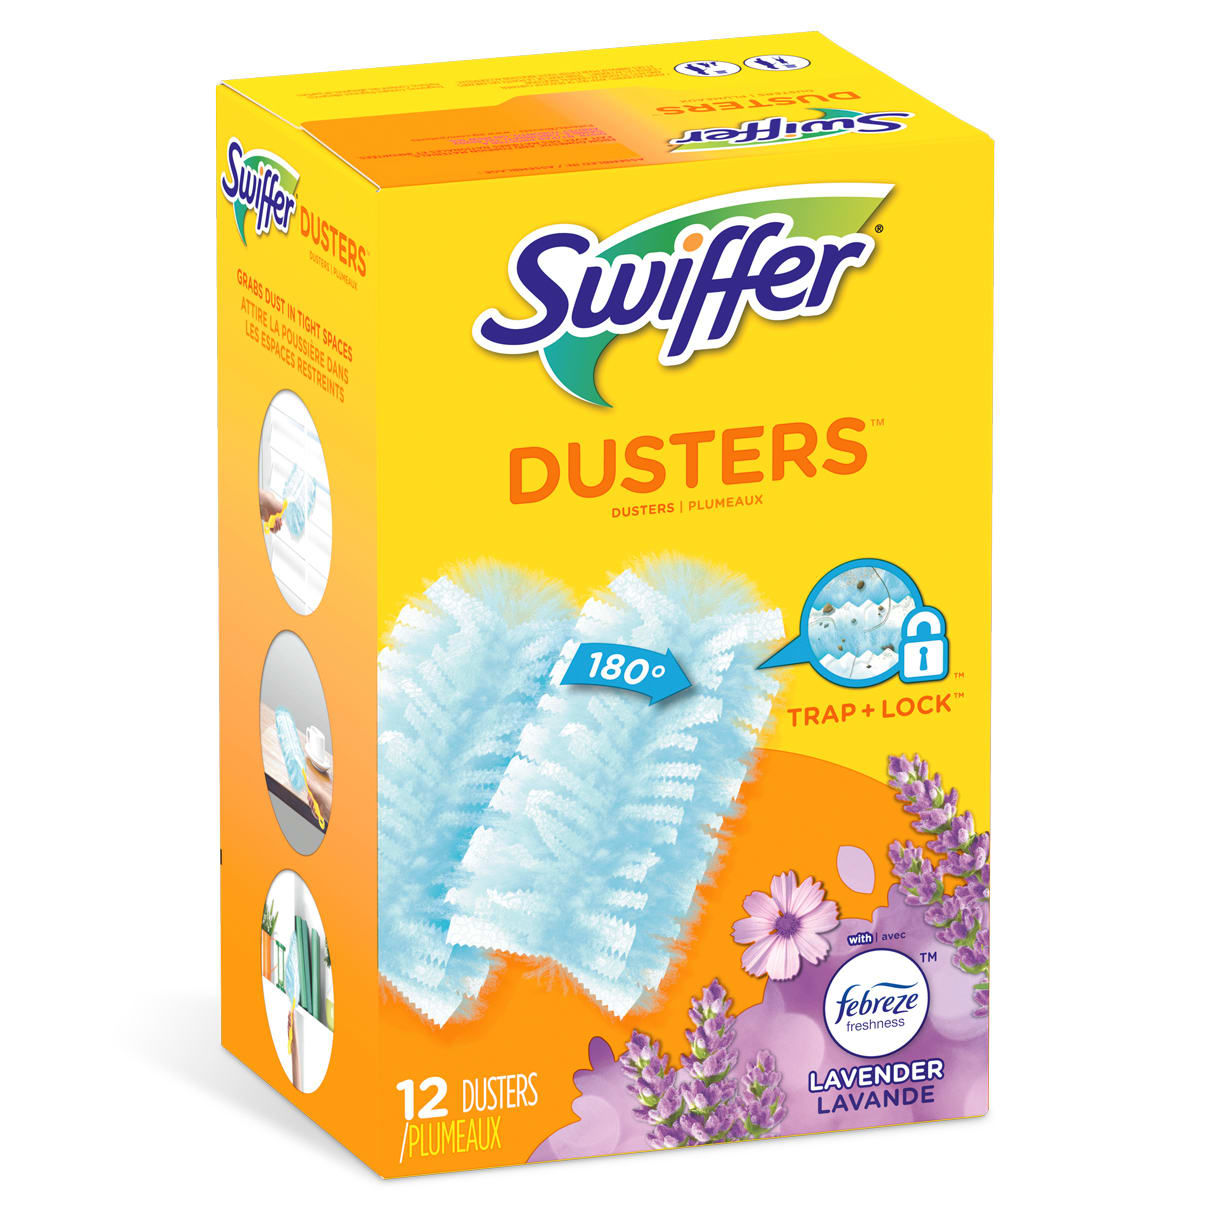 P&G Professional 3700016697 Swiffer® Dusters Refill. Yellow